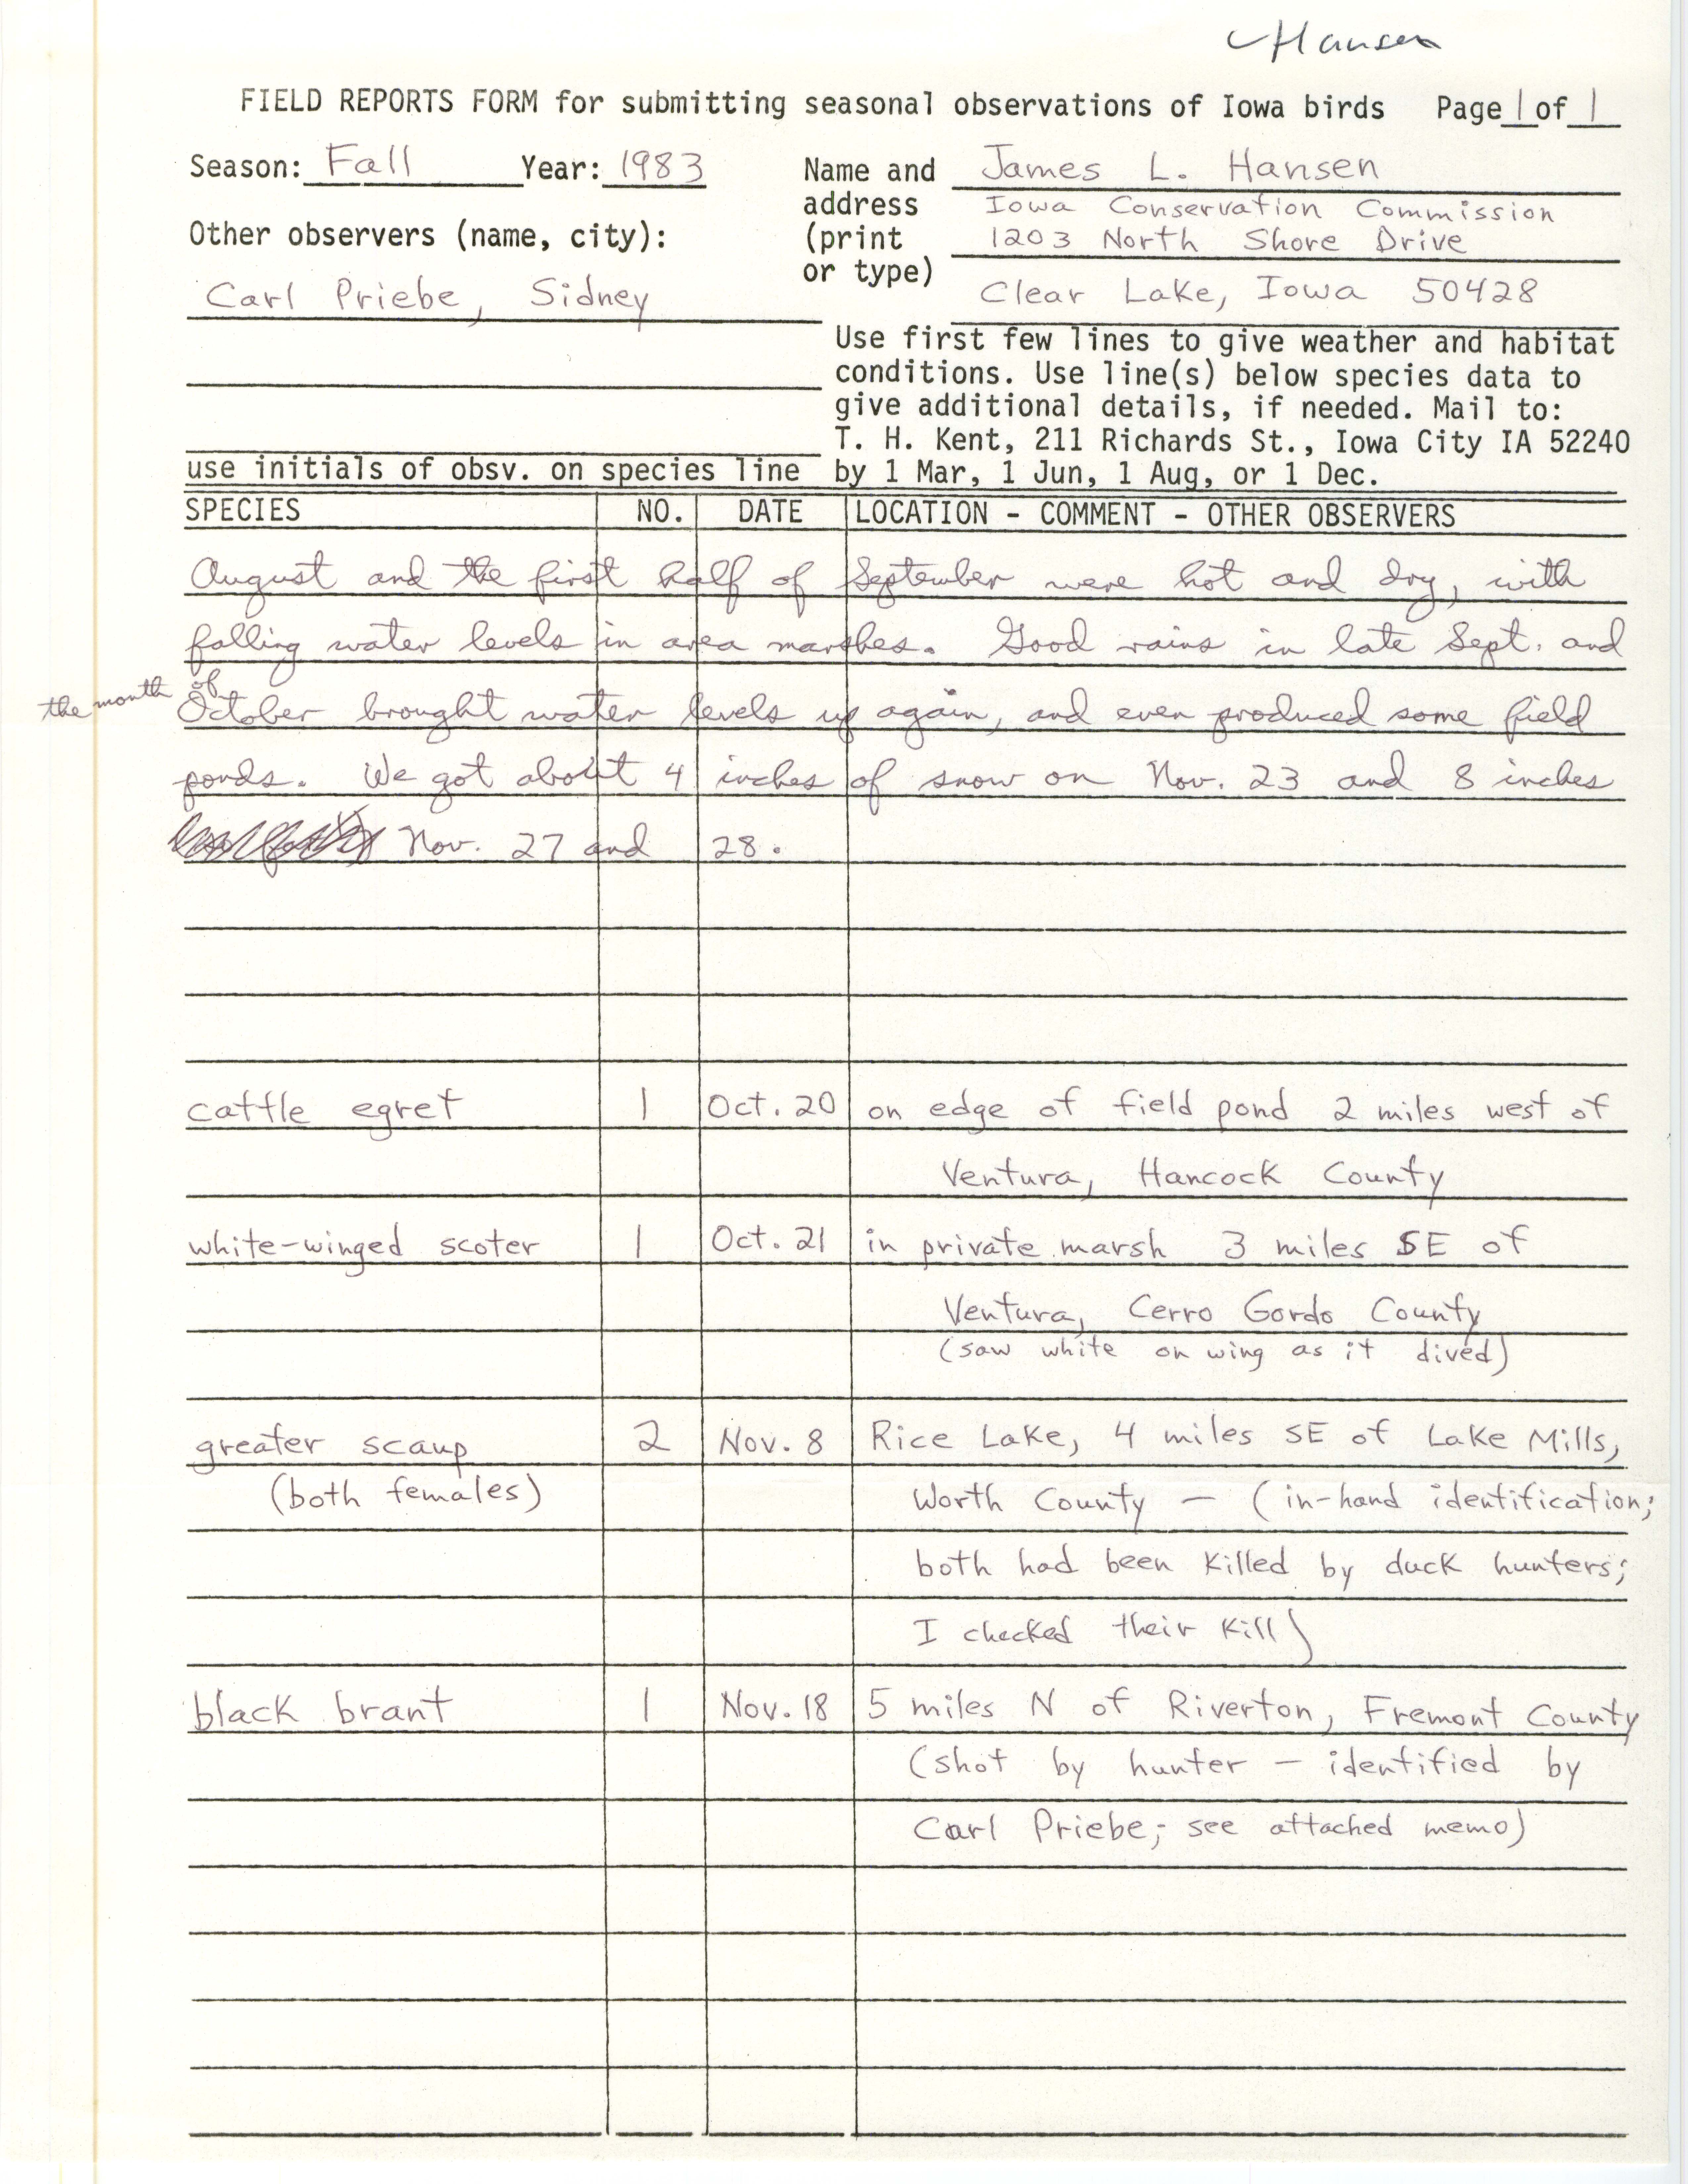 Field reports form for submitting seasonal observations of Iowa birds, James Hansen, fall 1983